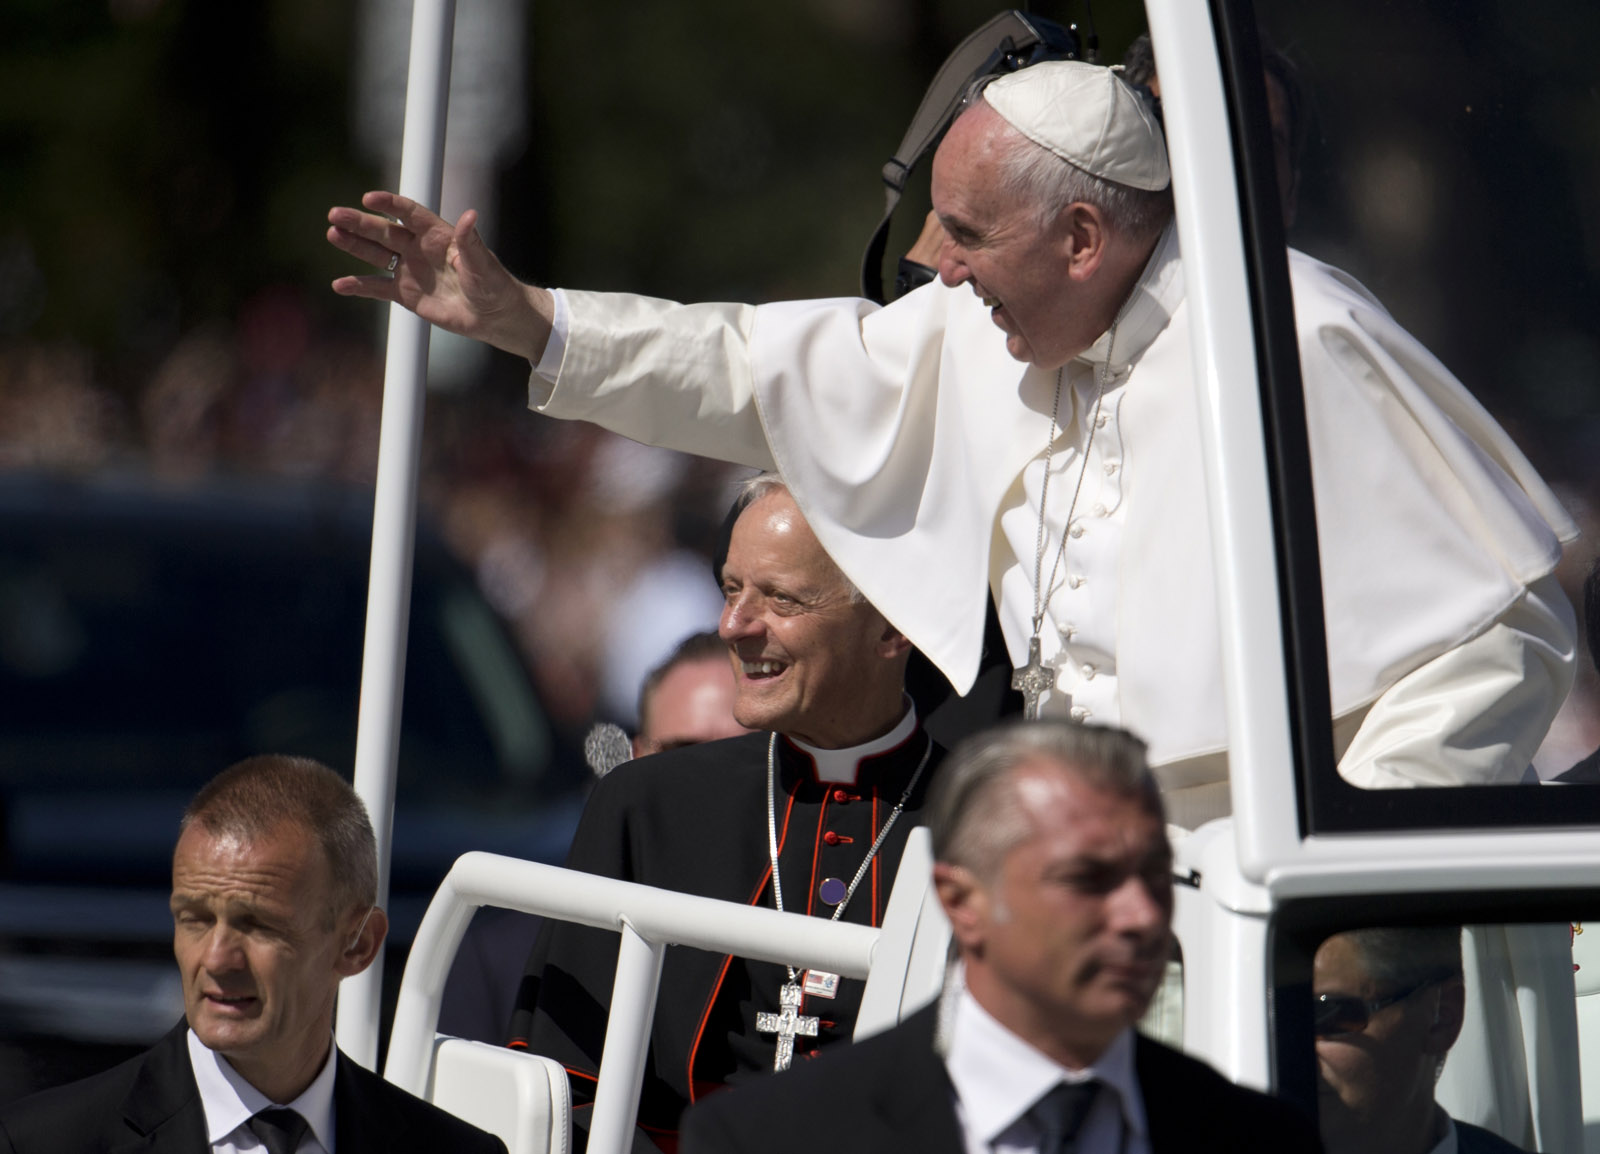 Pope Francis, joined by Cardinal Donald Wuerl, archbishop of Washington, waves from his popemobile during a parade around the Ellipse near the White House in Washington, Wednesday, Sept. 23, 2015. (AP Photo/Carolyn Kaster)